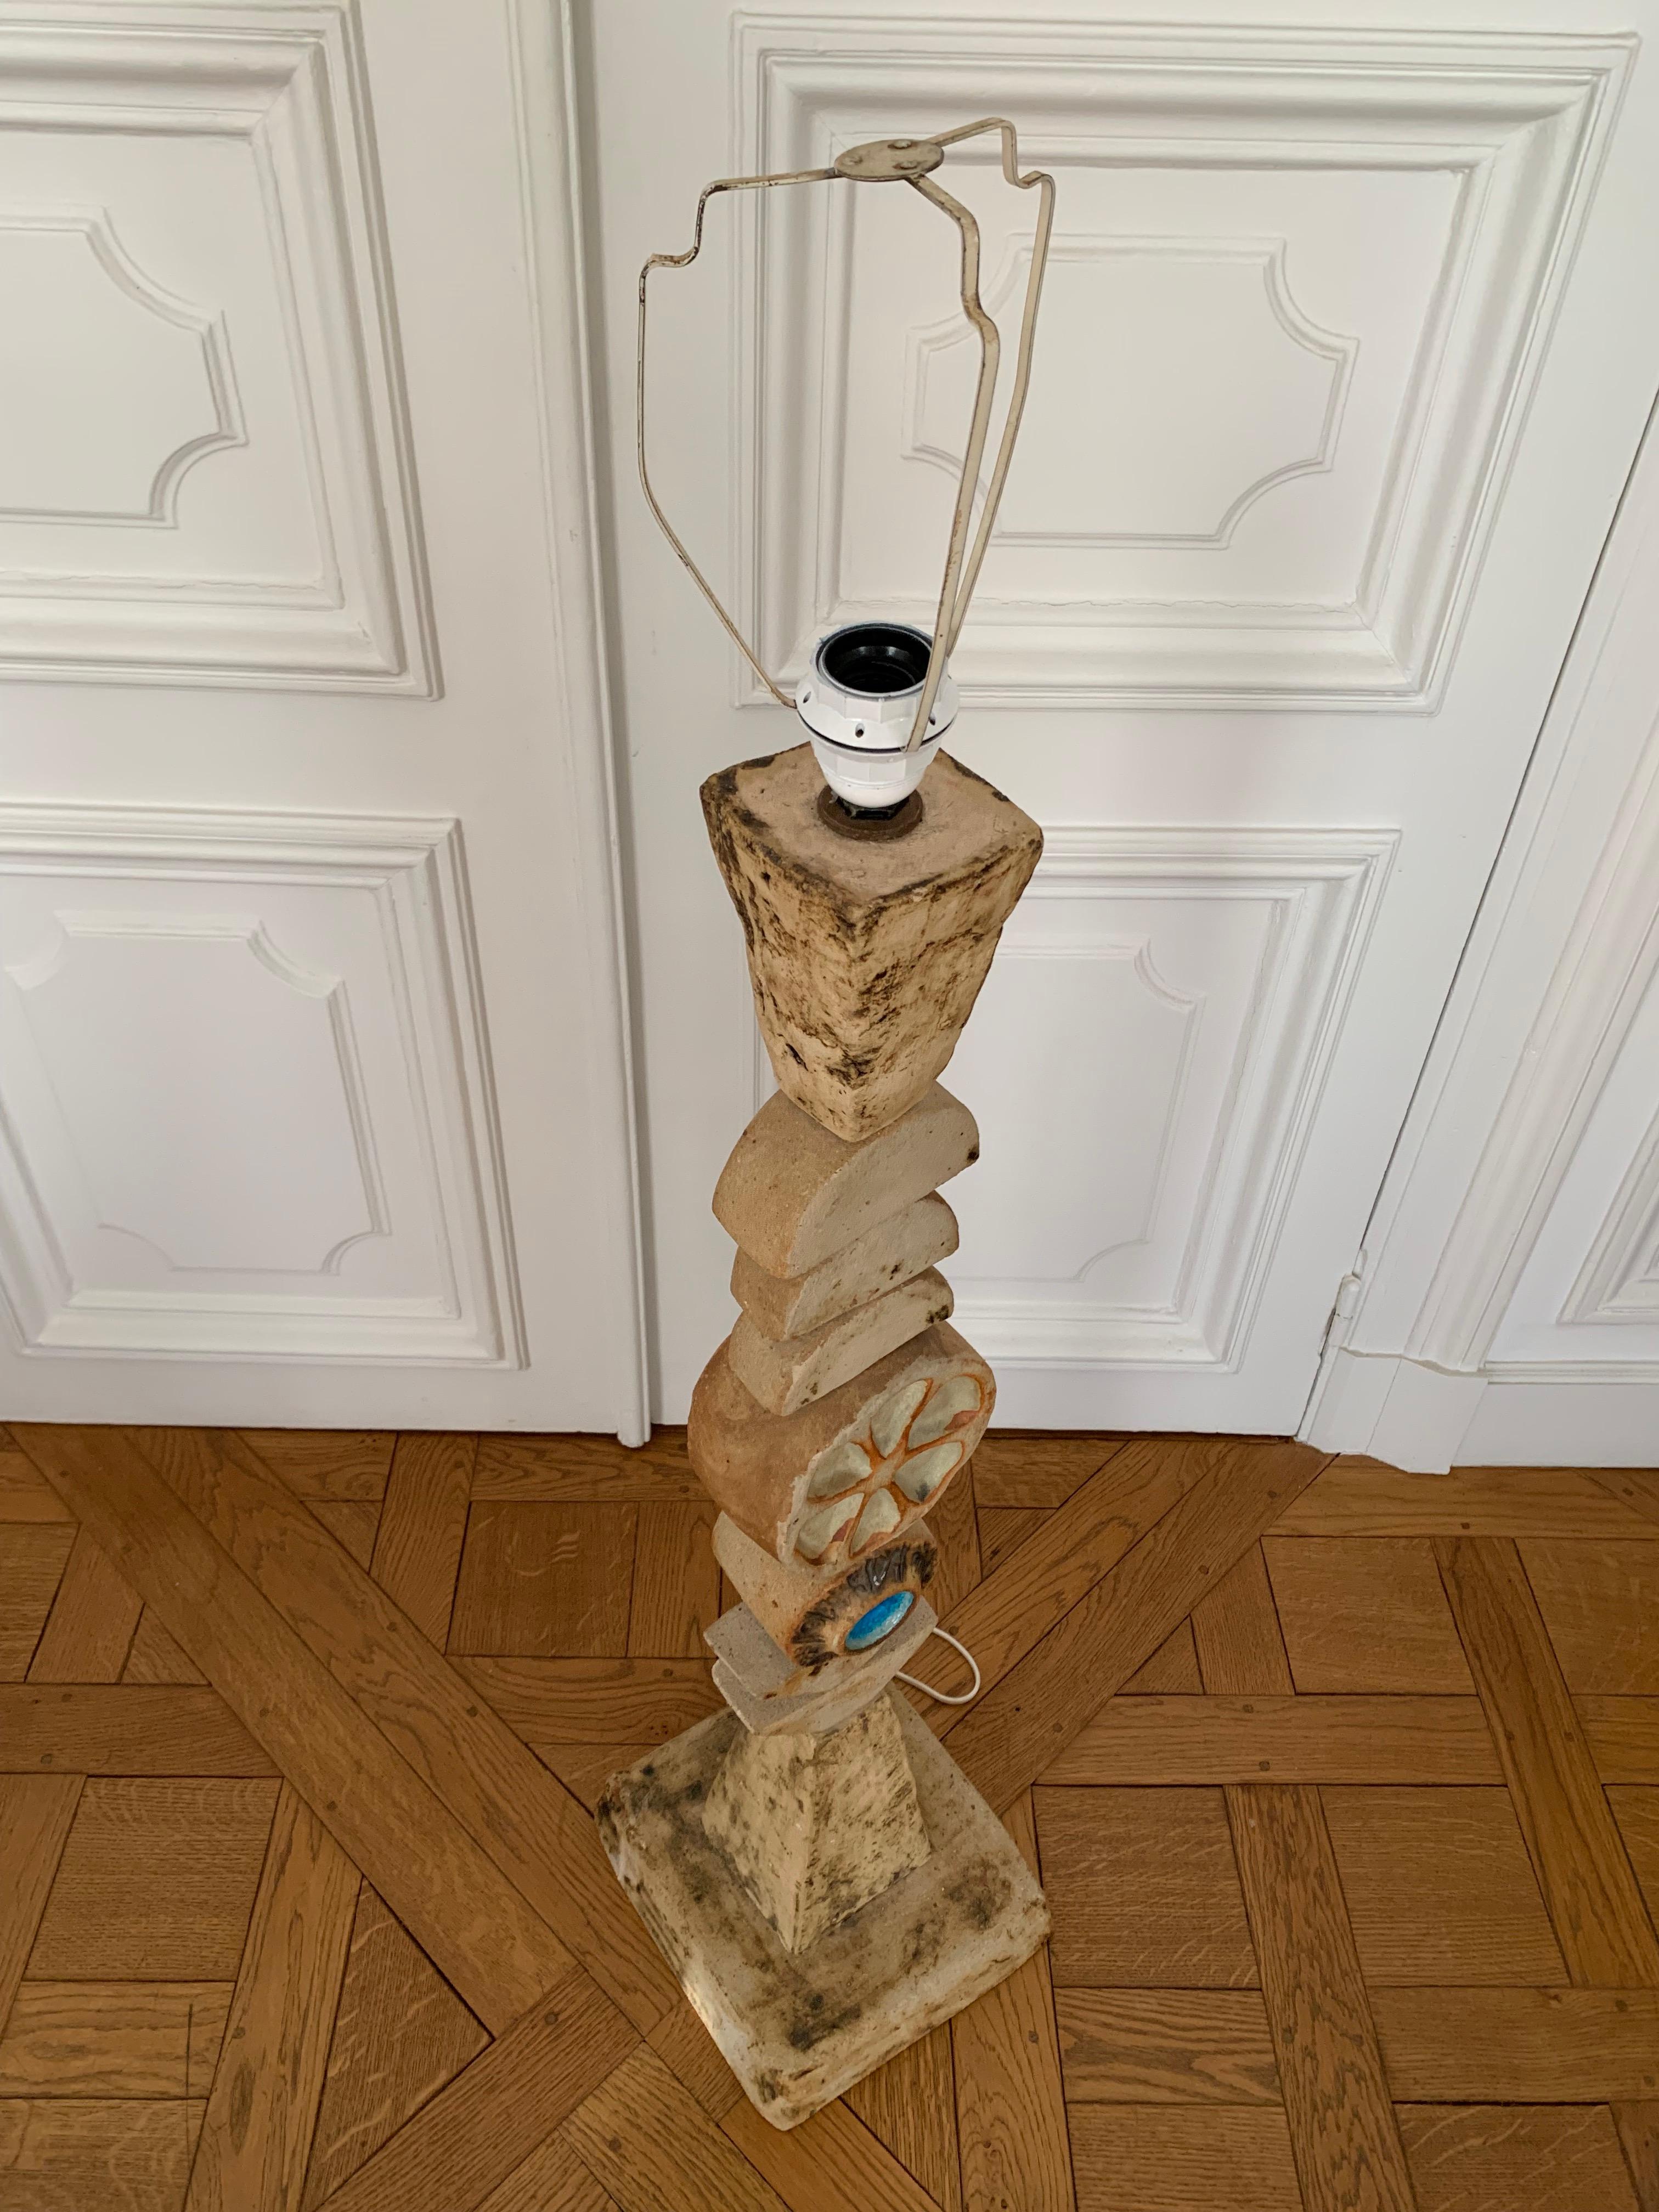 Totem lamp by Bernard Rooke England 1960
Dim with shade : 150 cm height diameter 40 cm without shade 117 cm height and 26 cm diameter 
This design is an early example of Rooke's work from the 1960s. A sculptural piece, composed of handcrafted